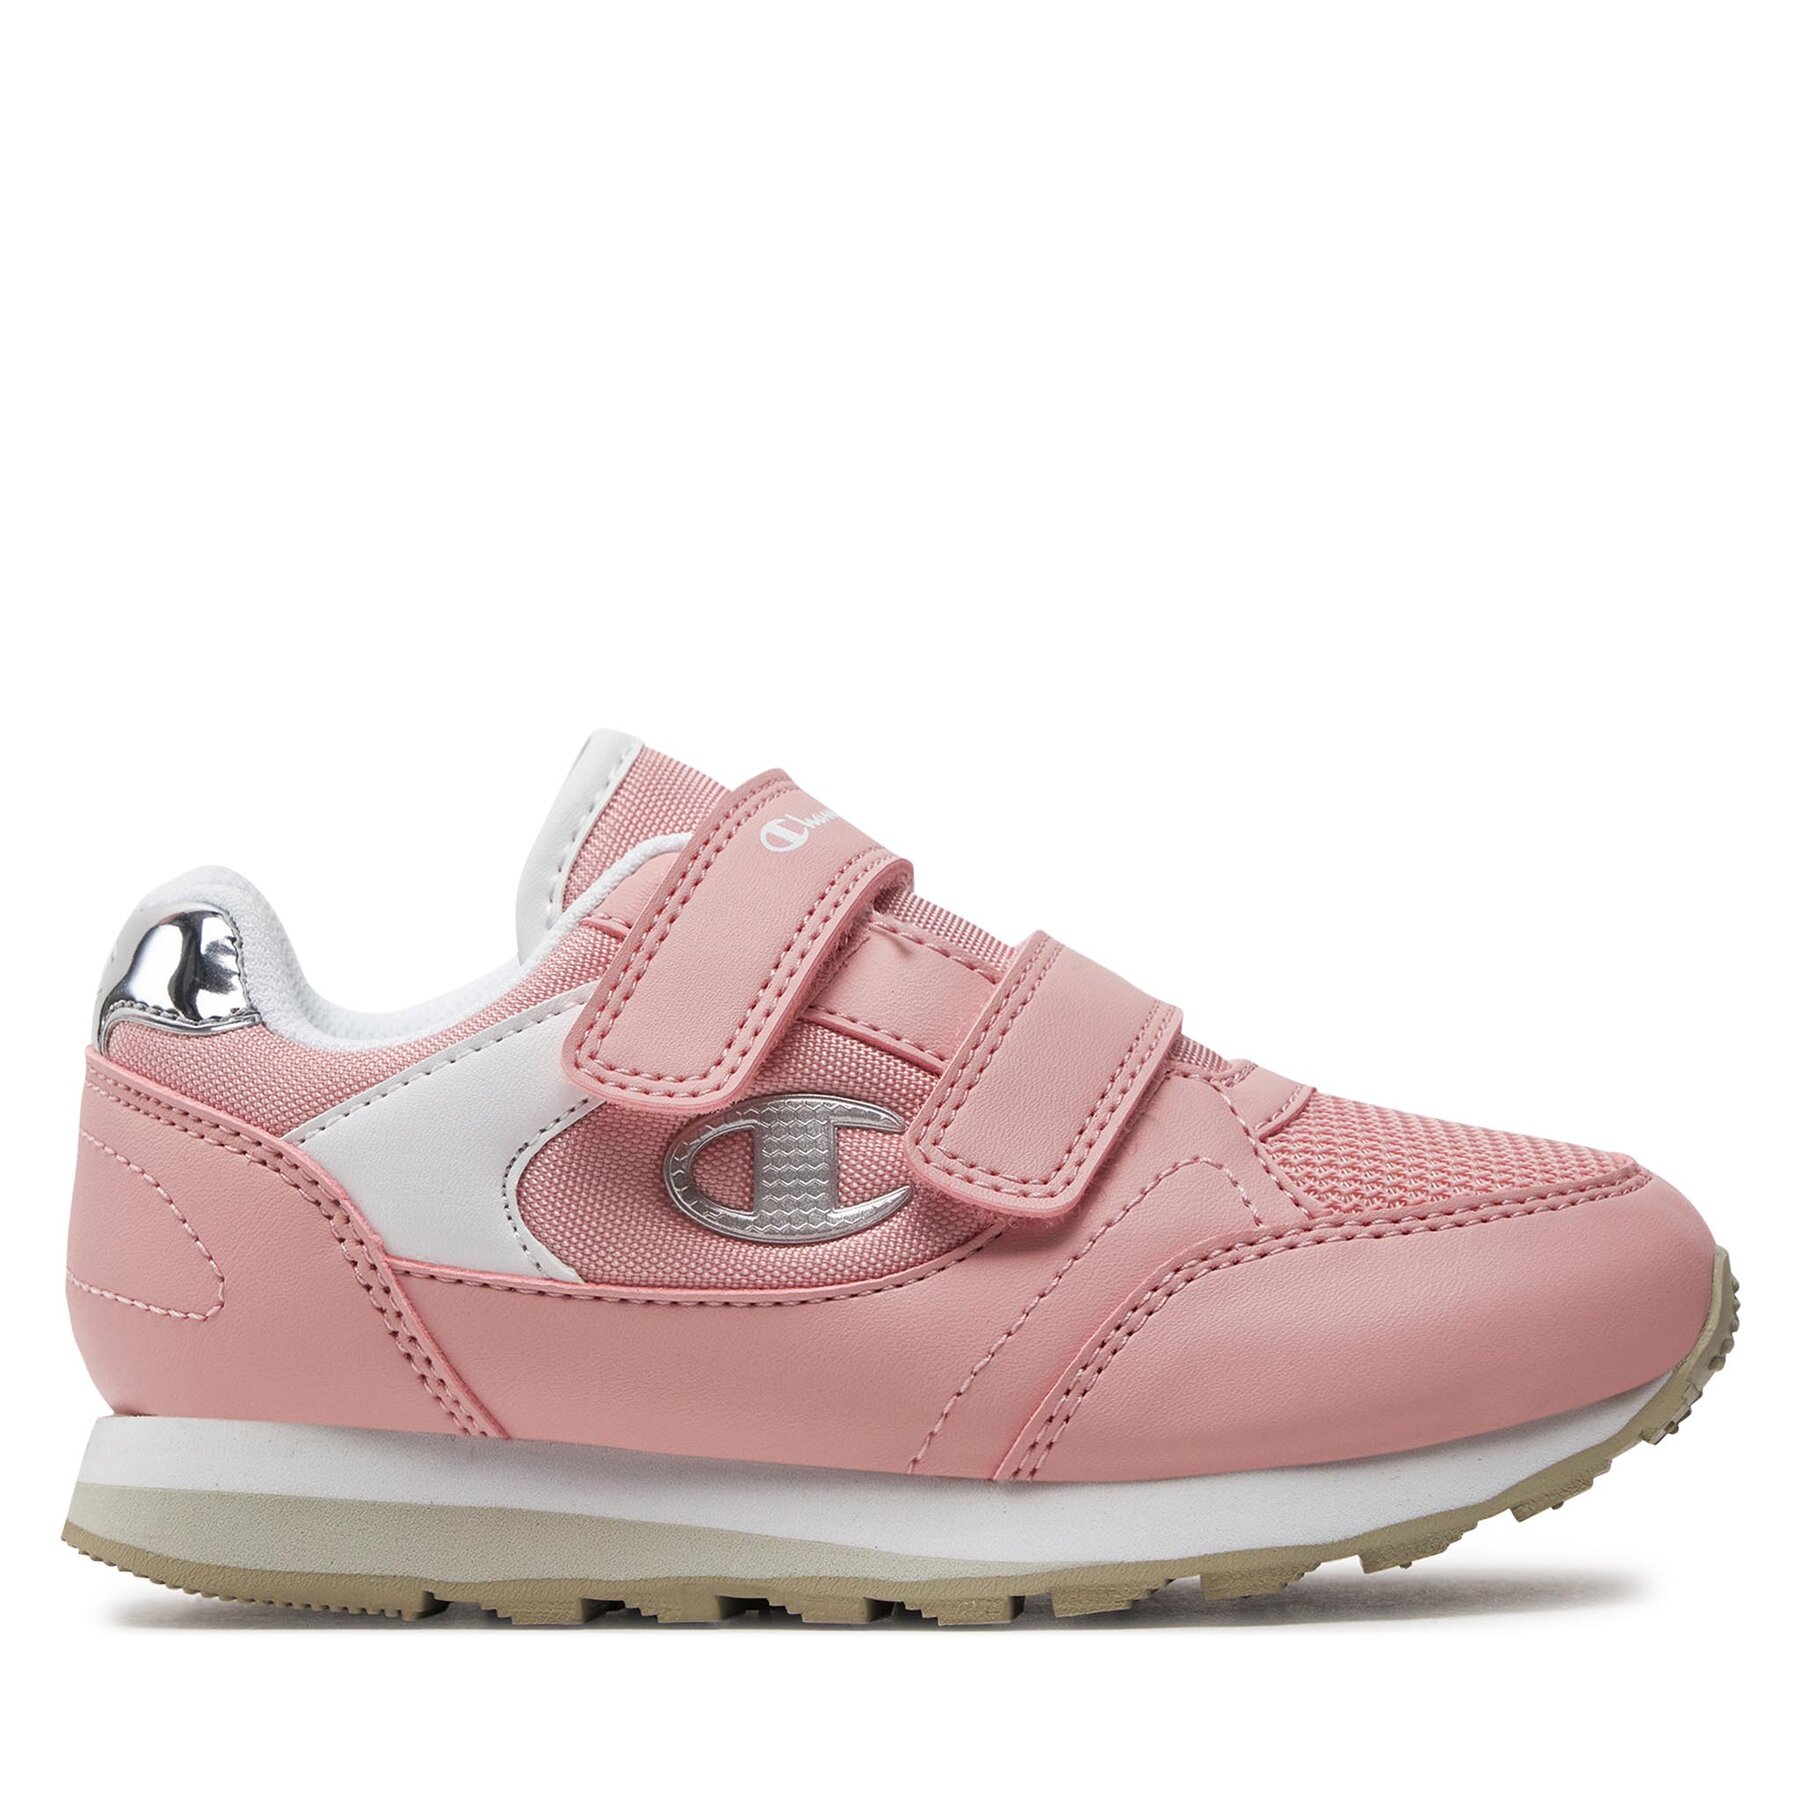 Sneakers Champion Rr Champ Ii G Ps Low Cut Shoe S32756-CHA-PS127 Dusty Rose/Silver von Champion